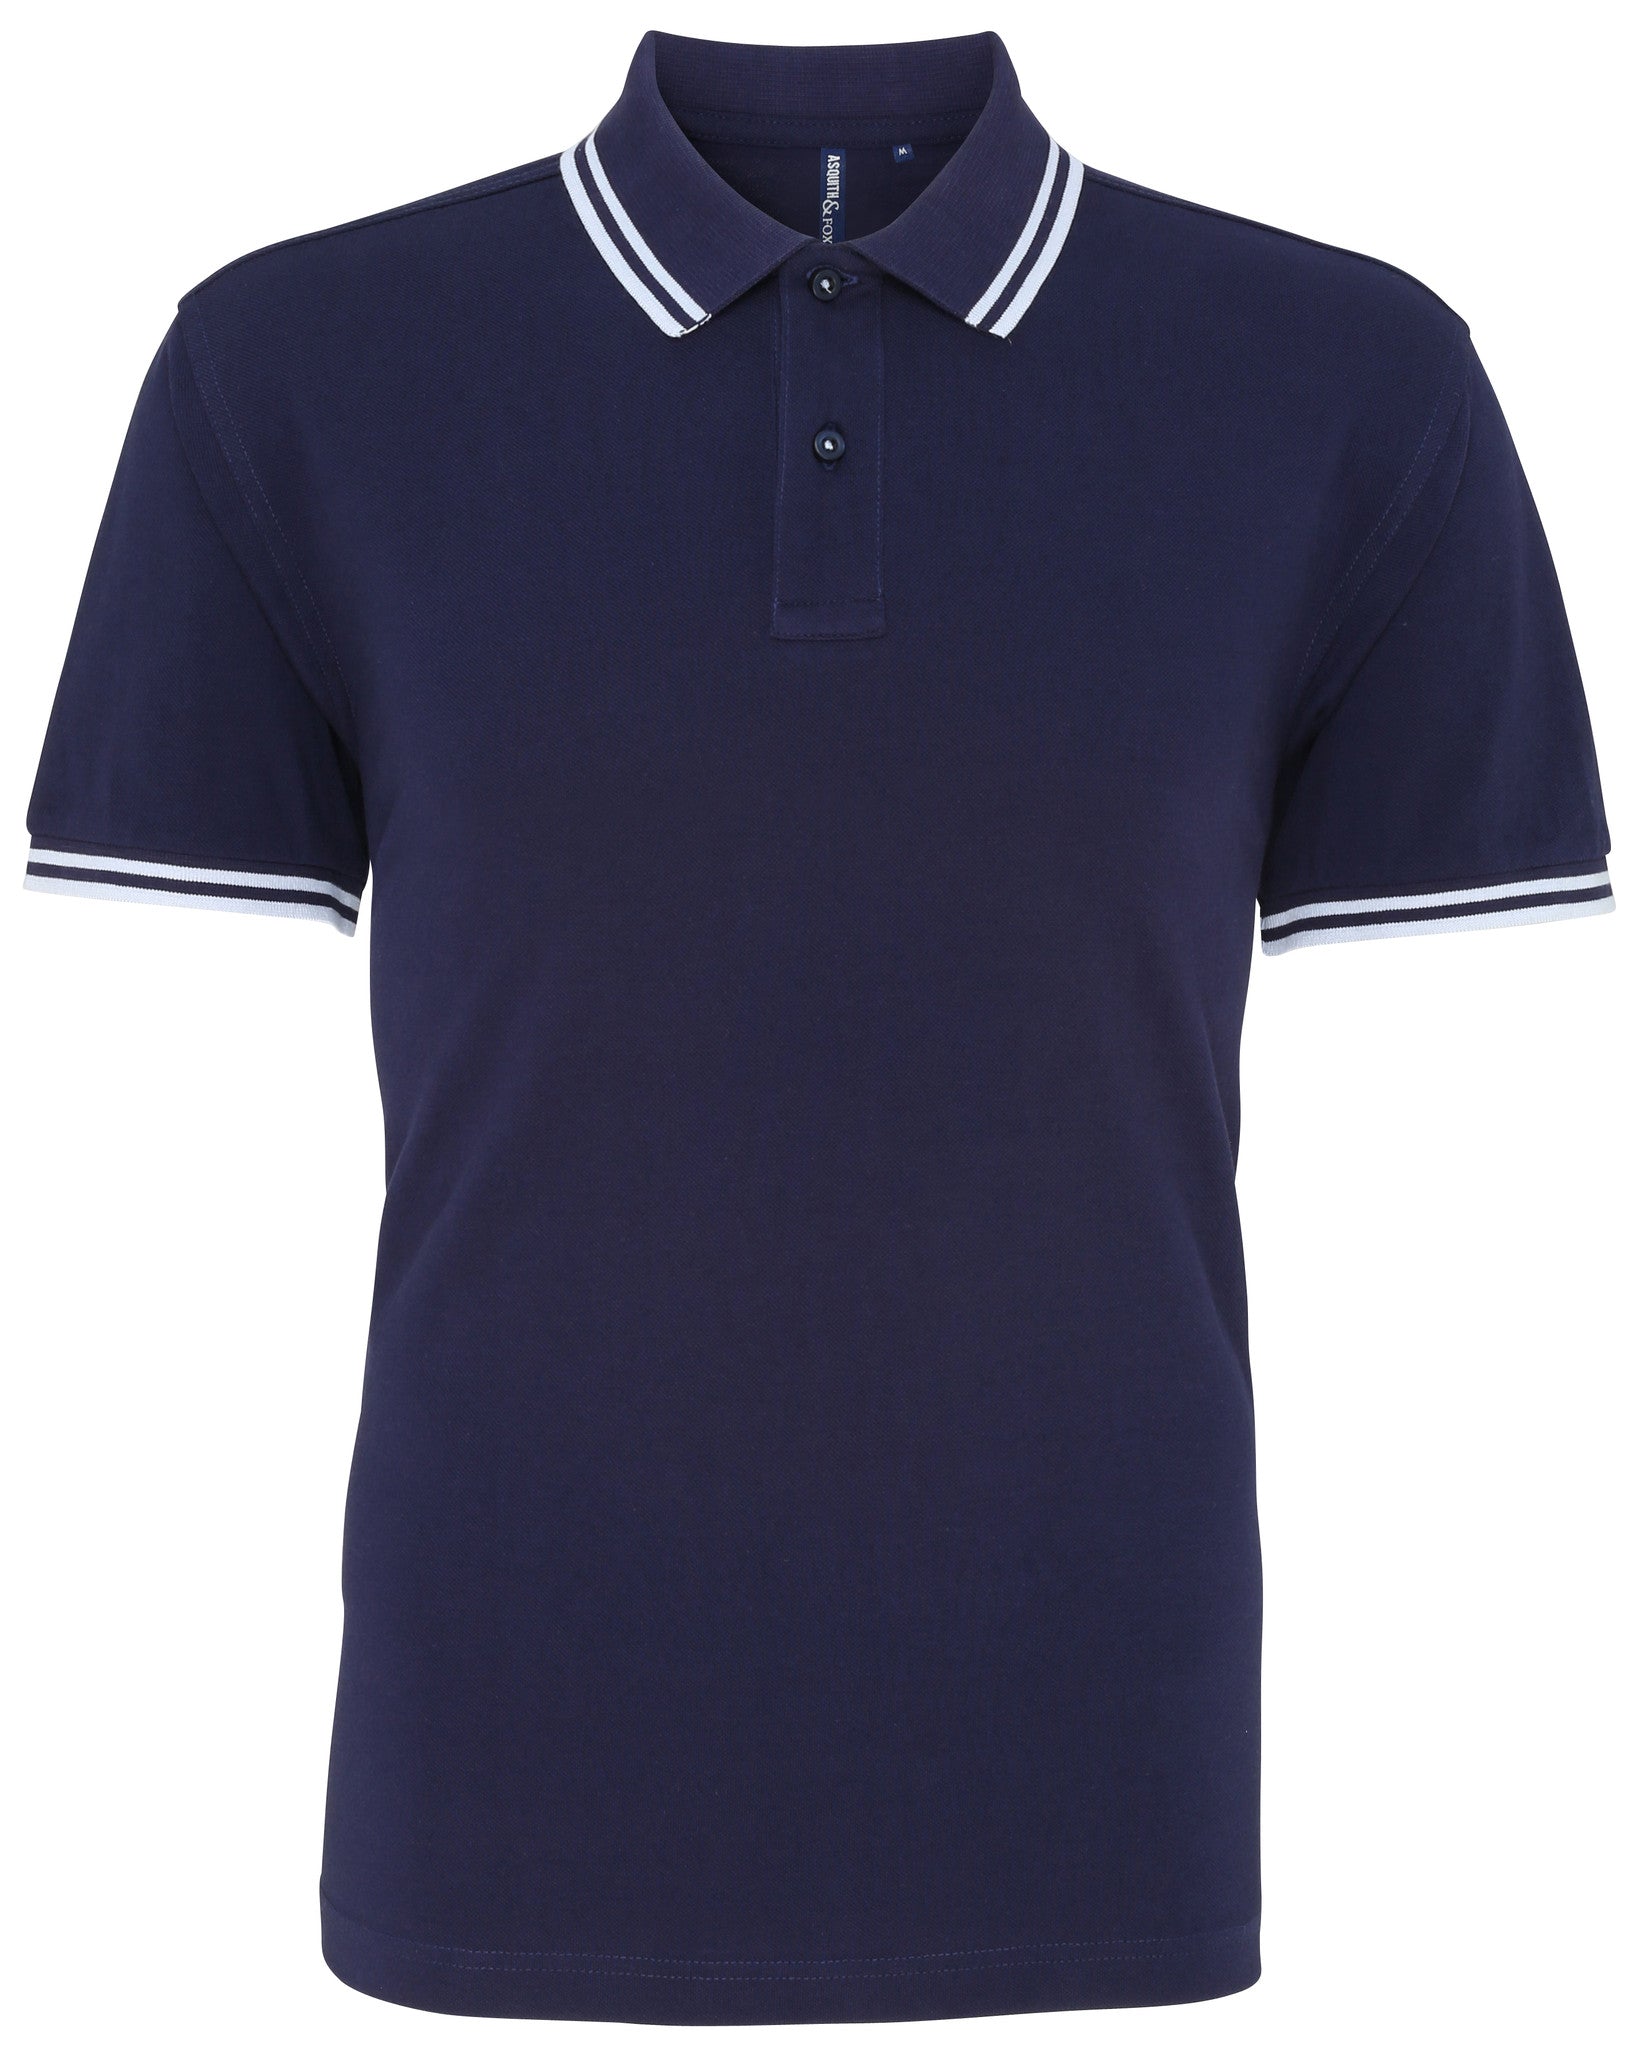 Men's classic fit tipped polo – YOUR CUSTOM CLOTHING